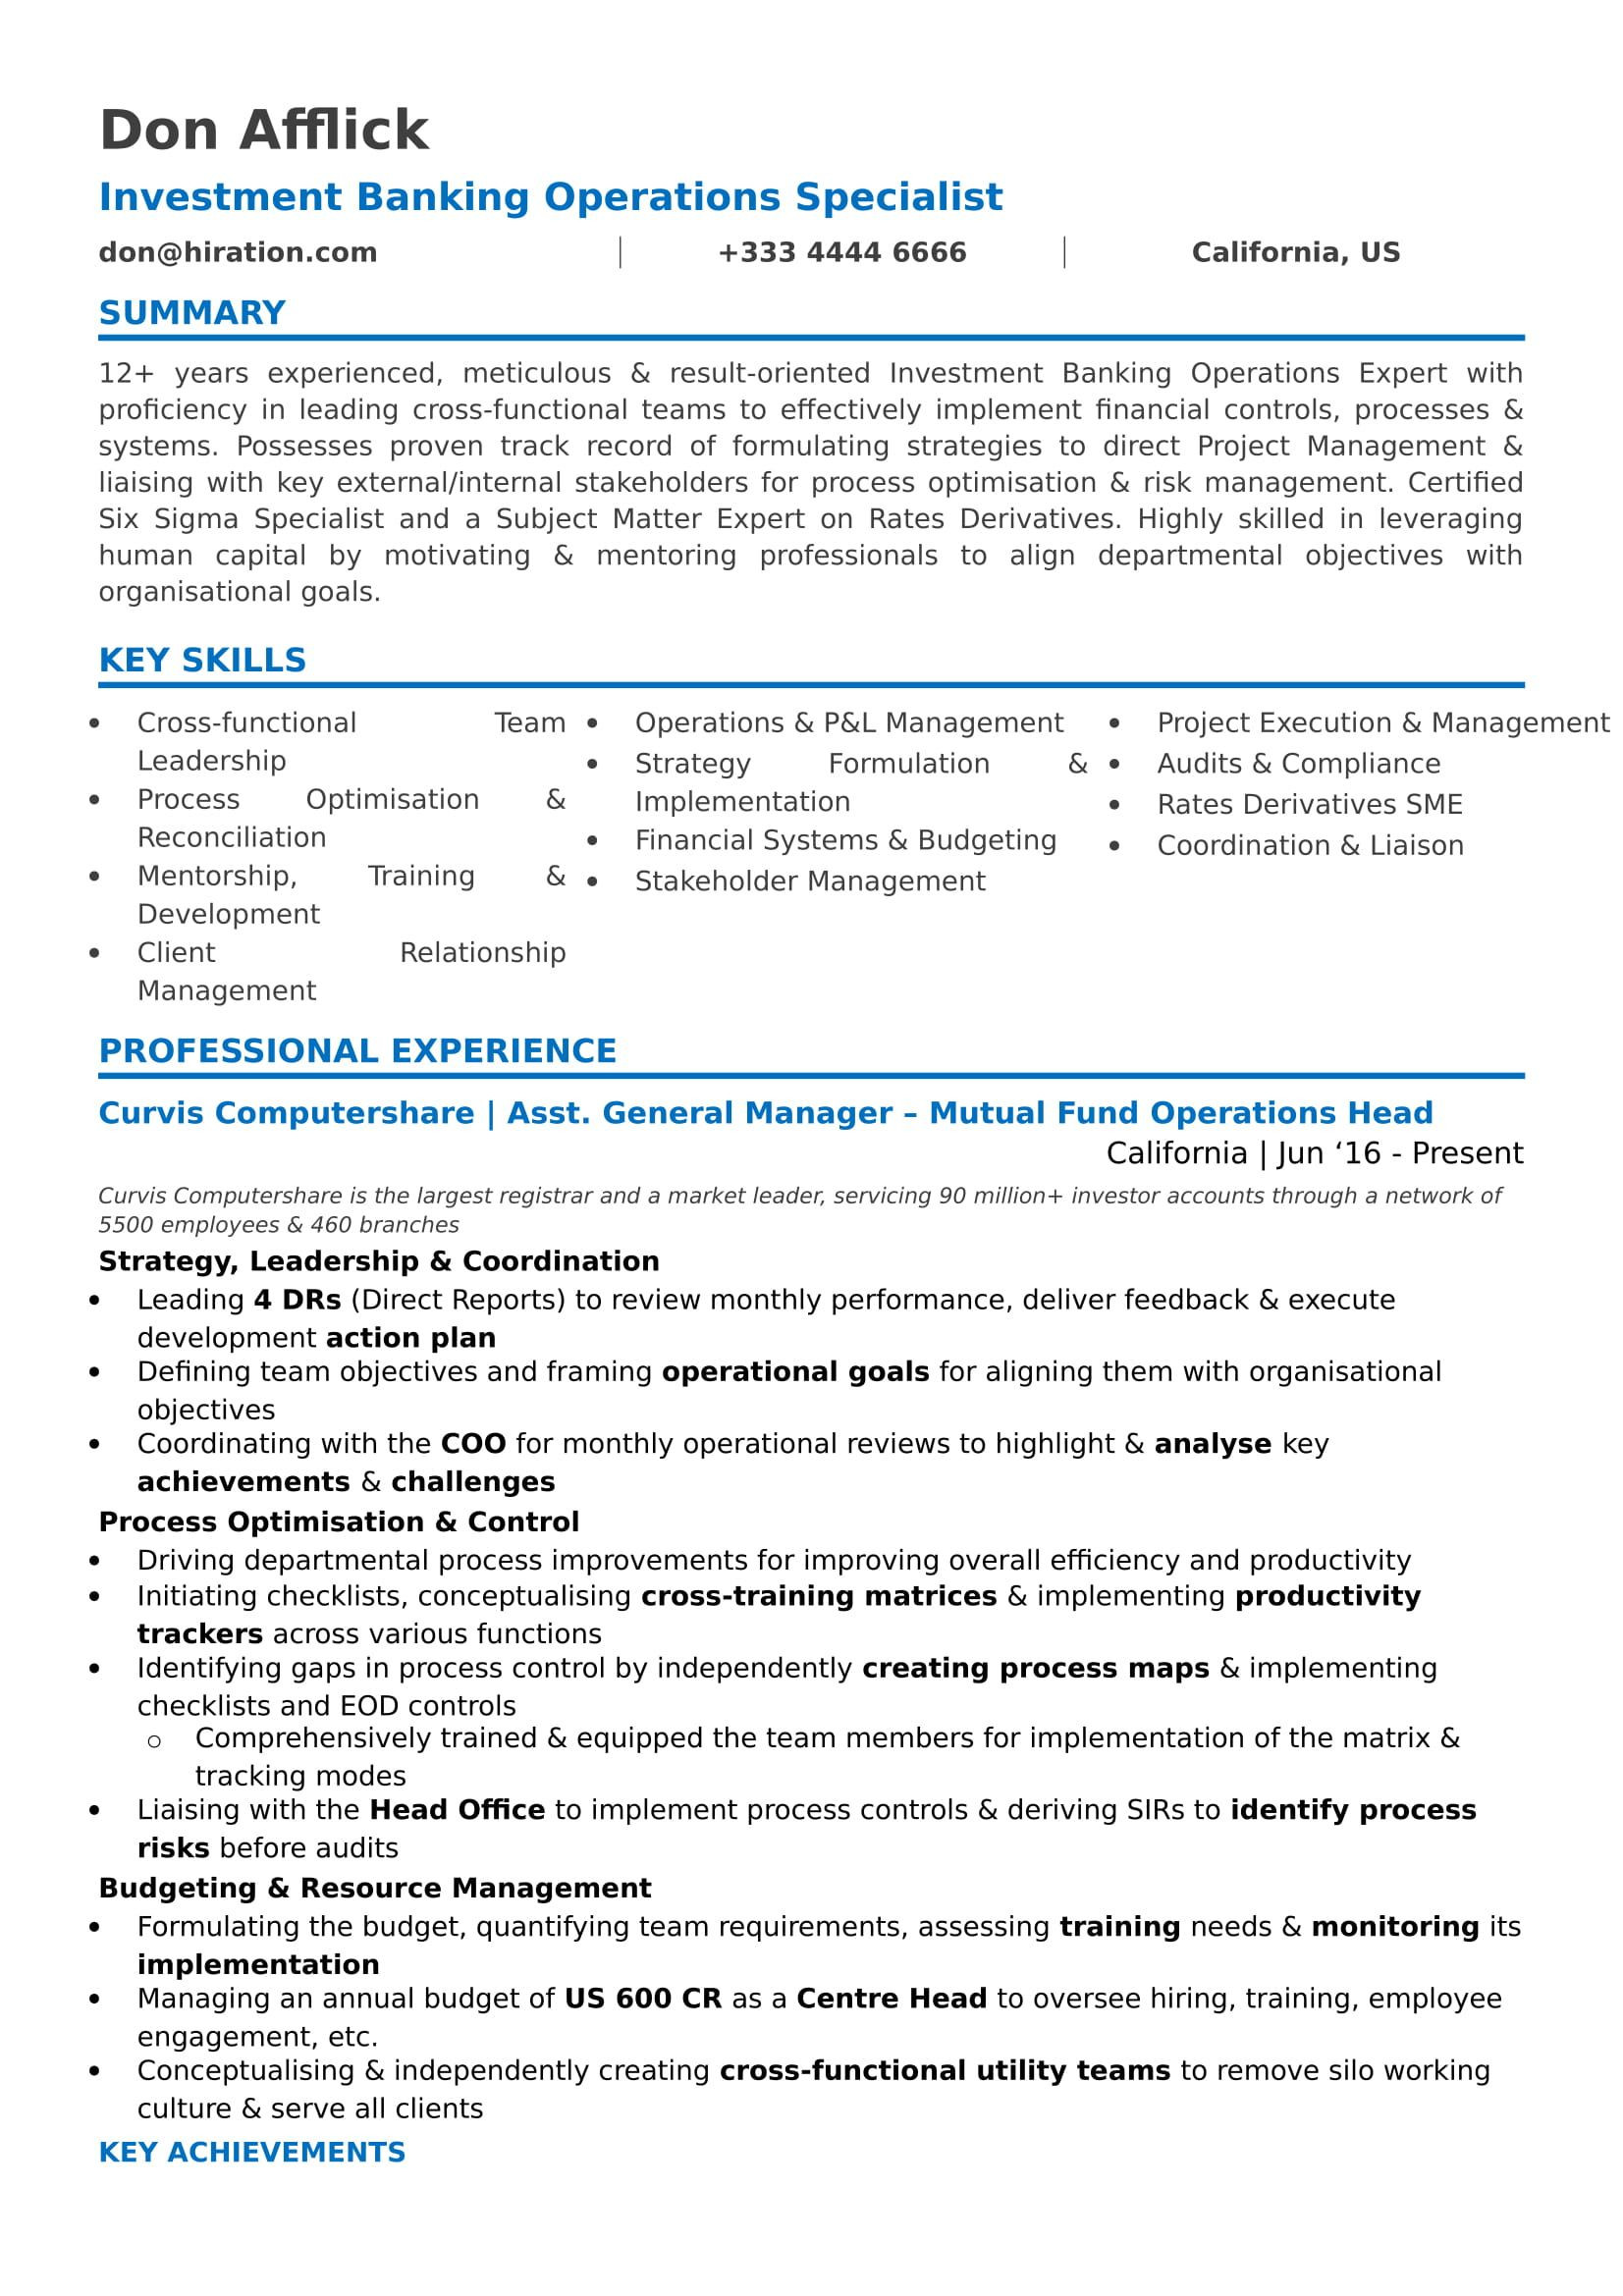 Sample Resume Objectives for Changing Careers Career Change Resume: 2022 Guide to Resume for Career Change